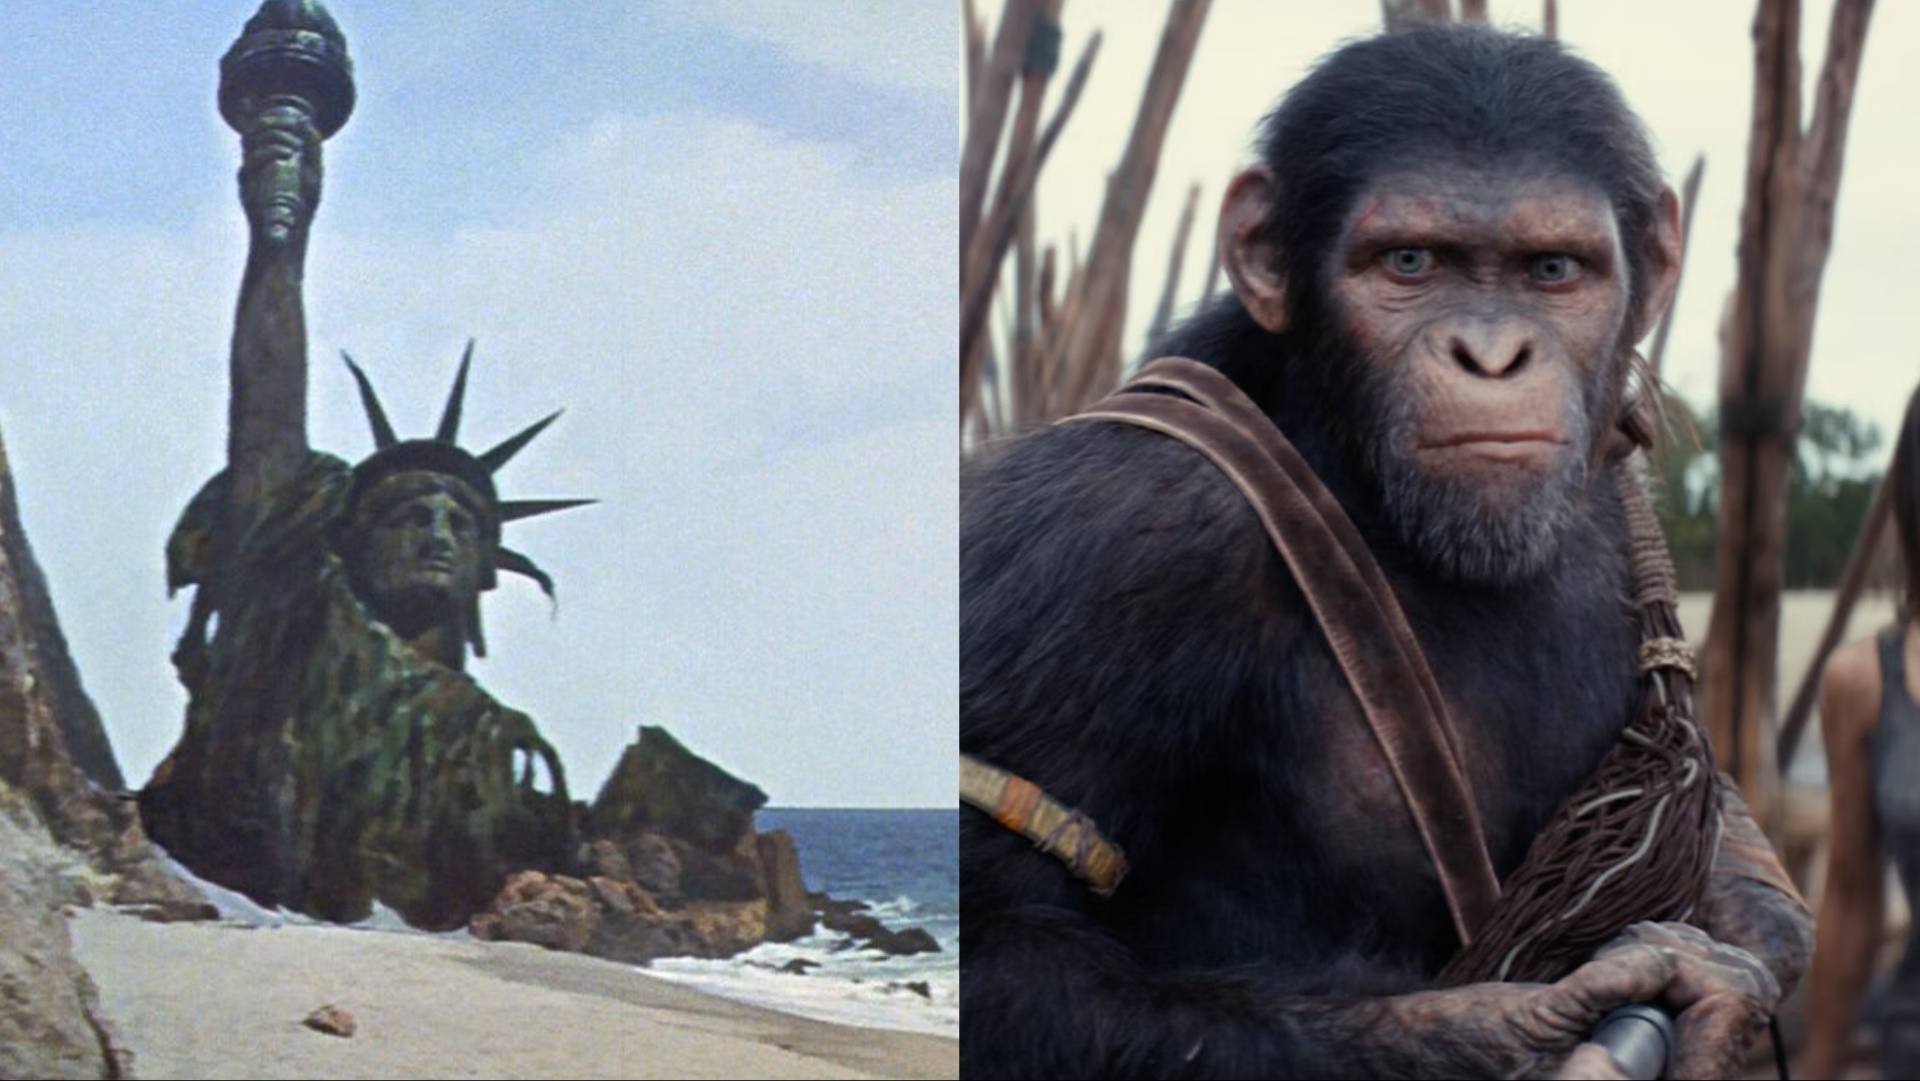 Stills from Planet of the Apes